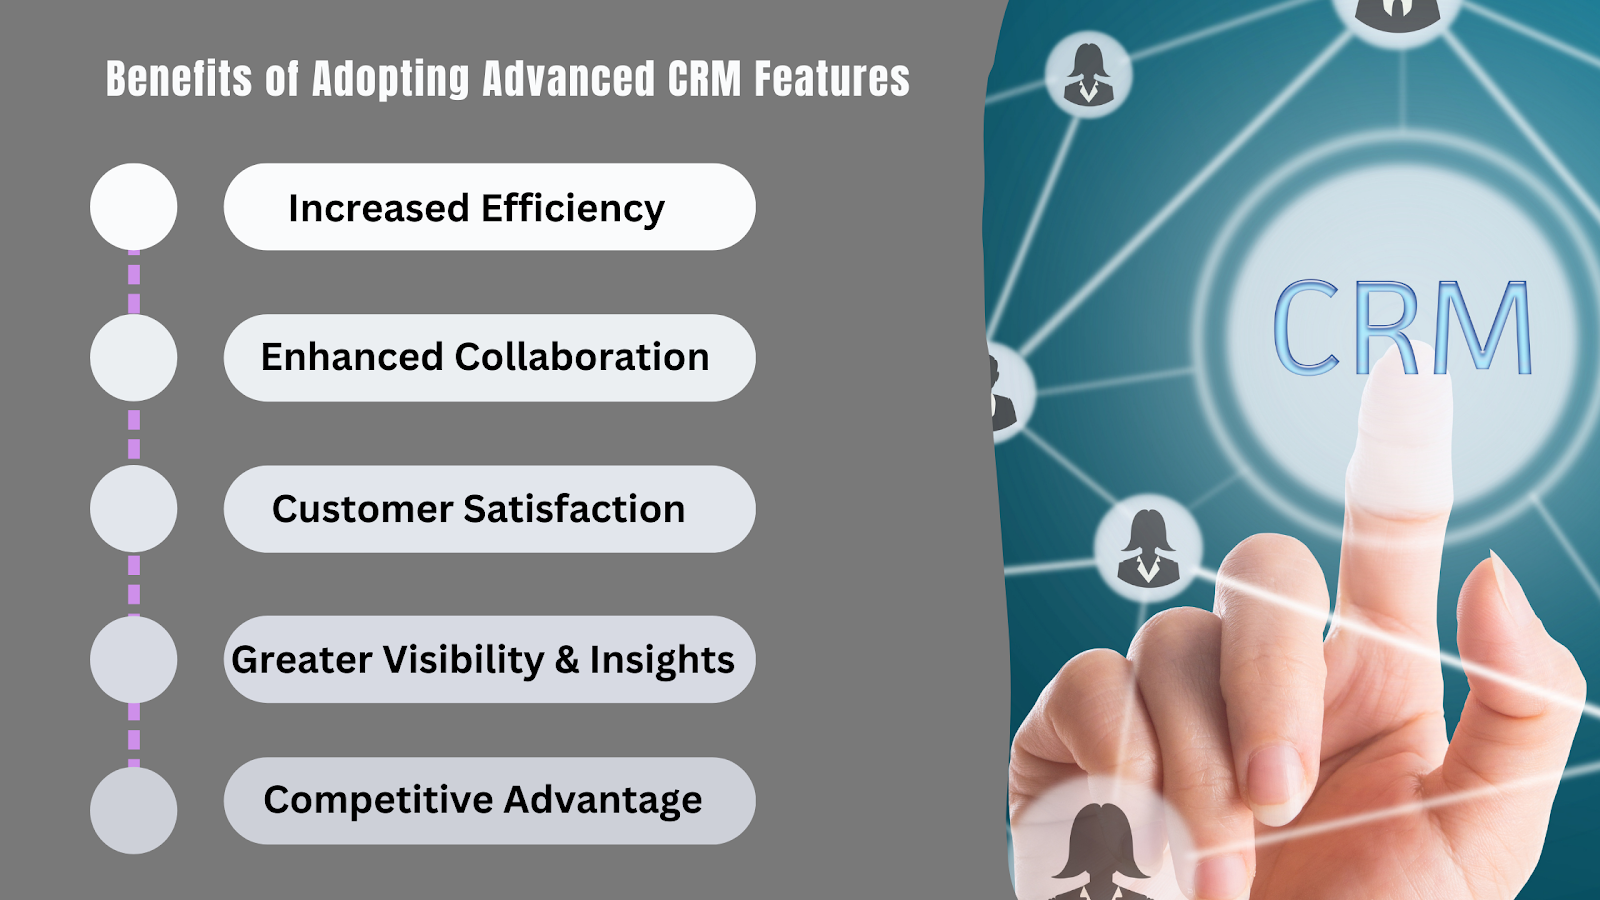 Benefits of Adopting Advanced CRM Features for manufacturers' reps
